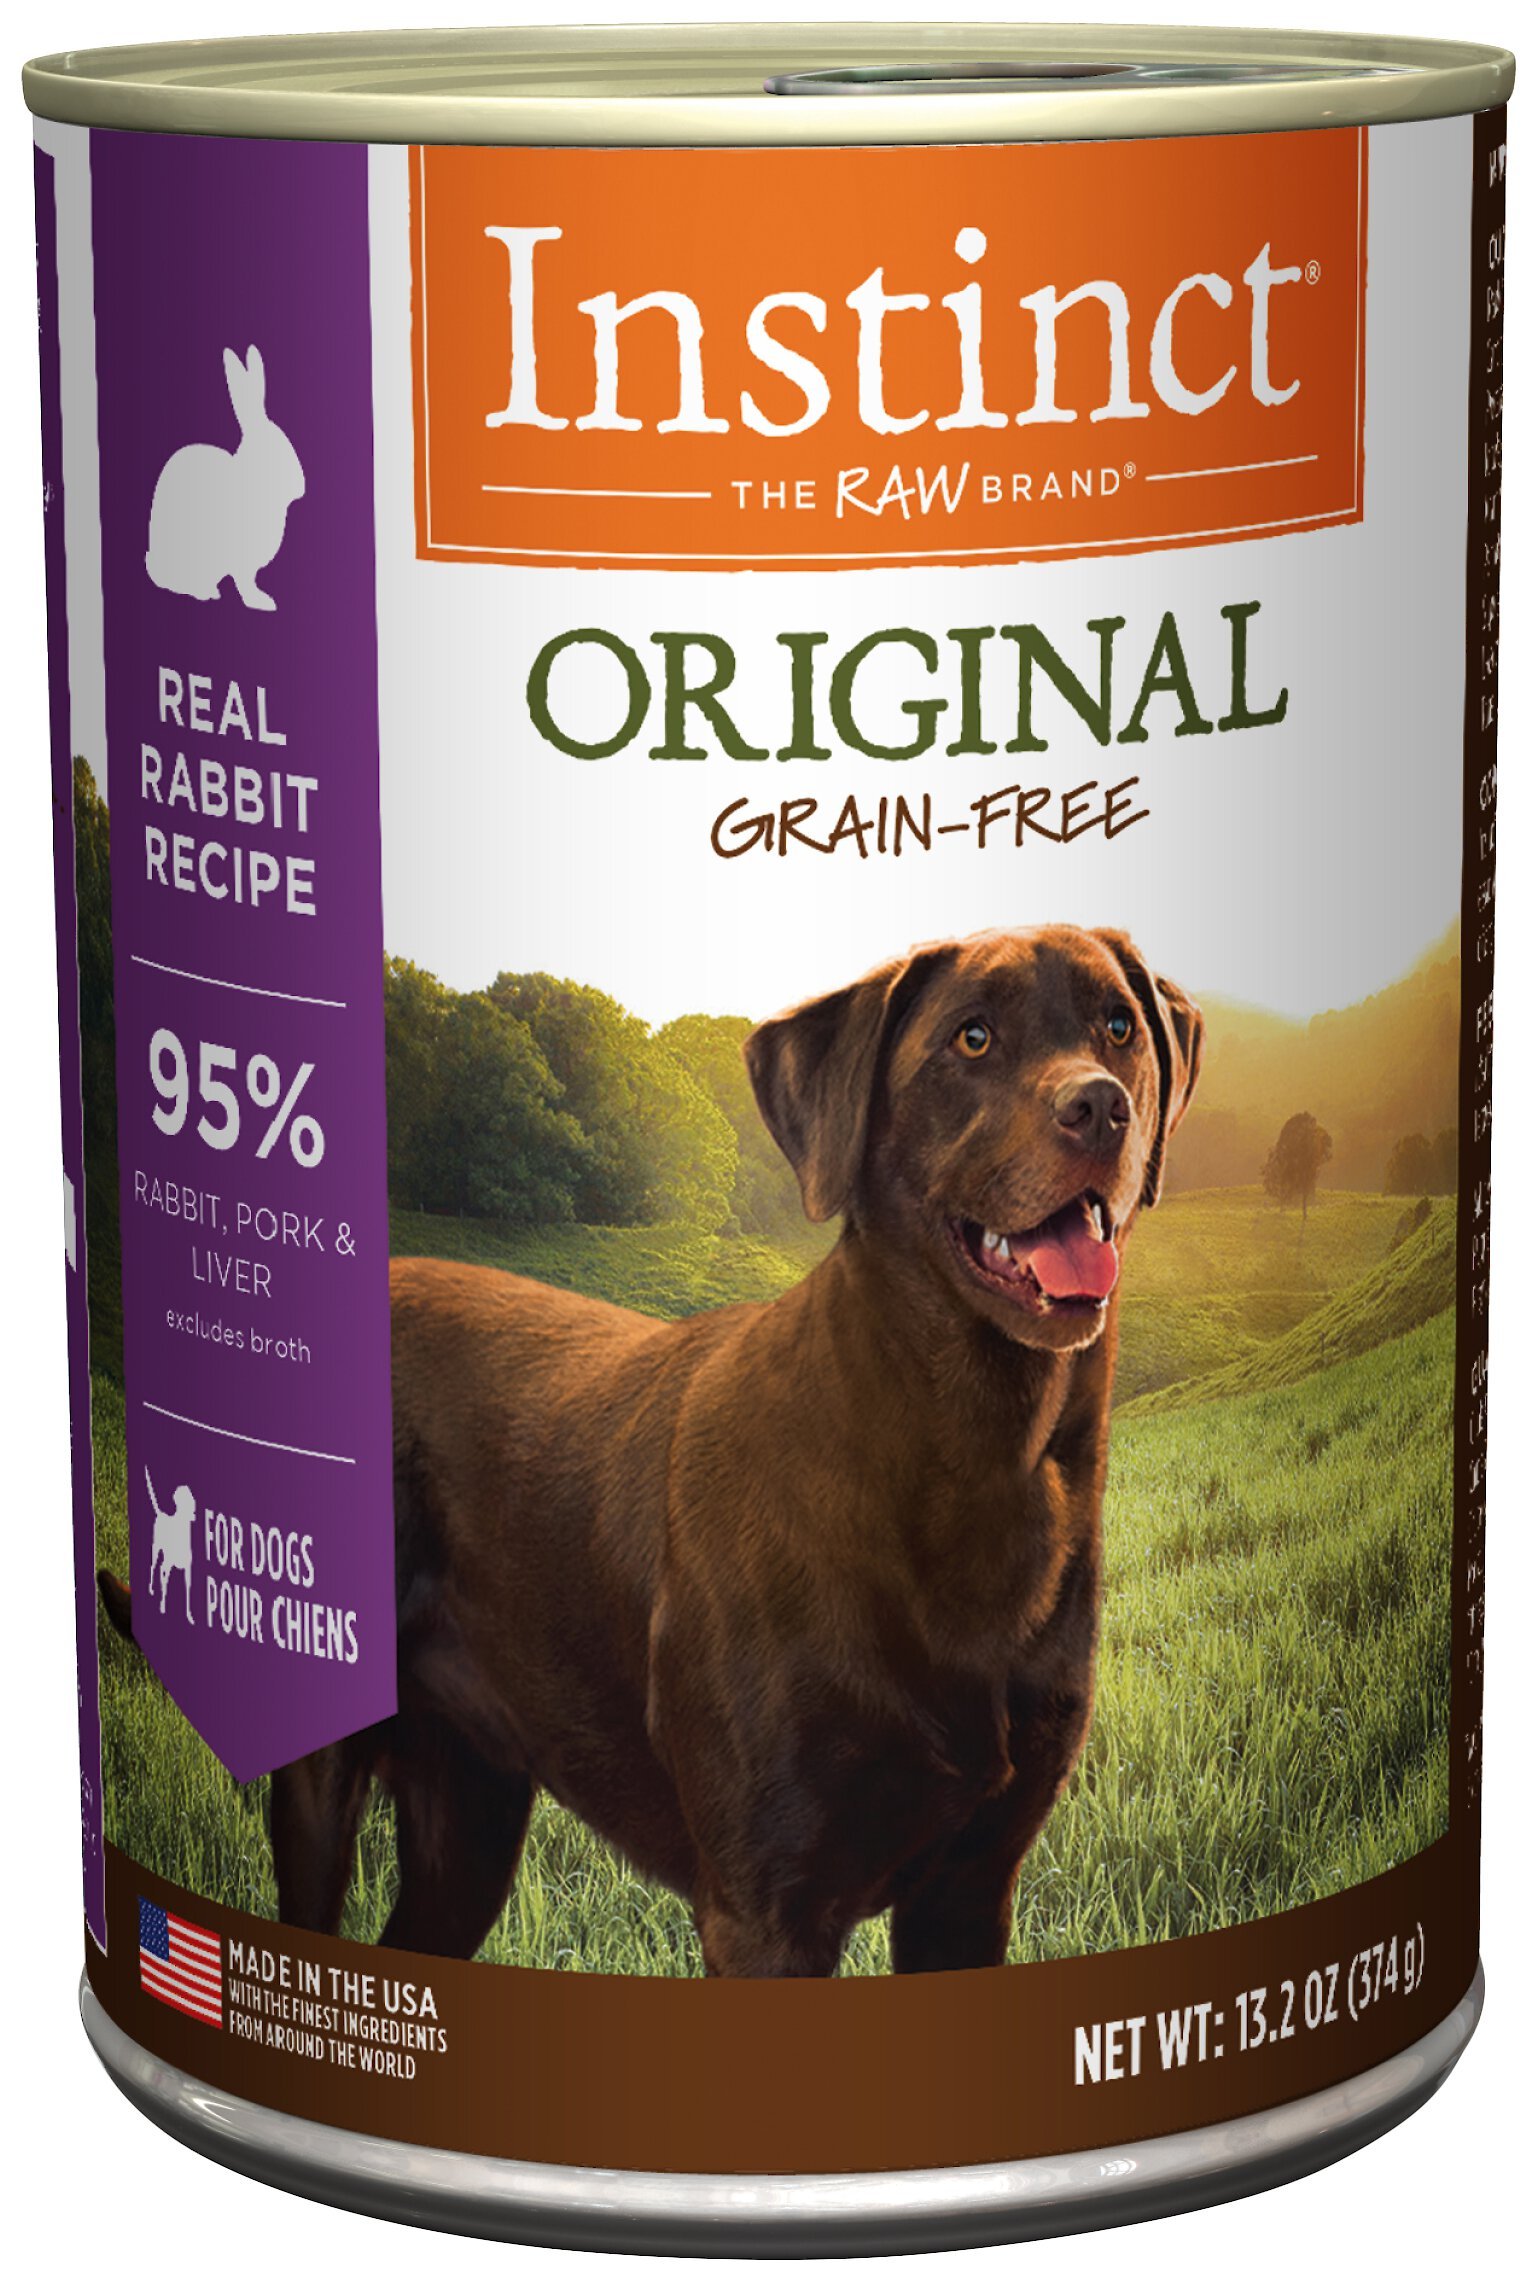 Does Your Pet Food Contain Carrageenan? - Normal, Illinois